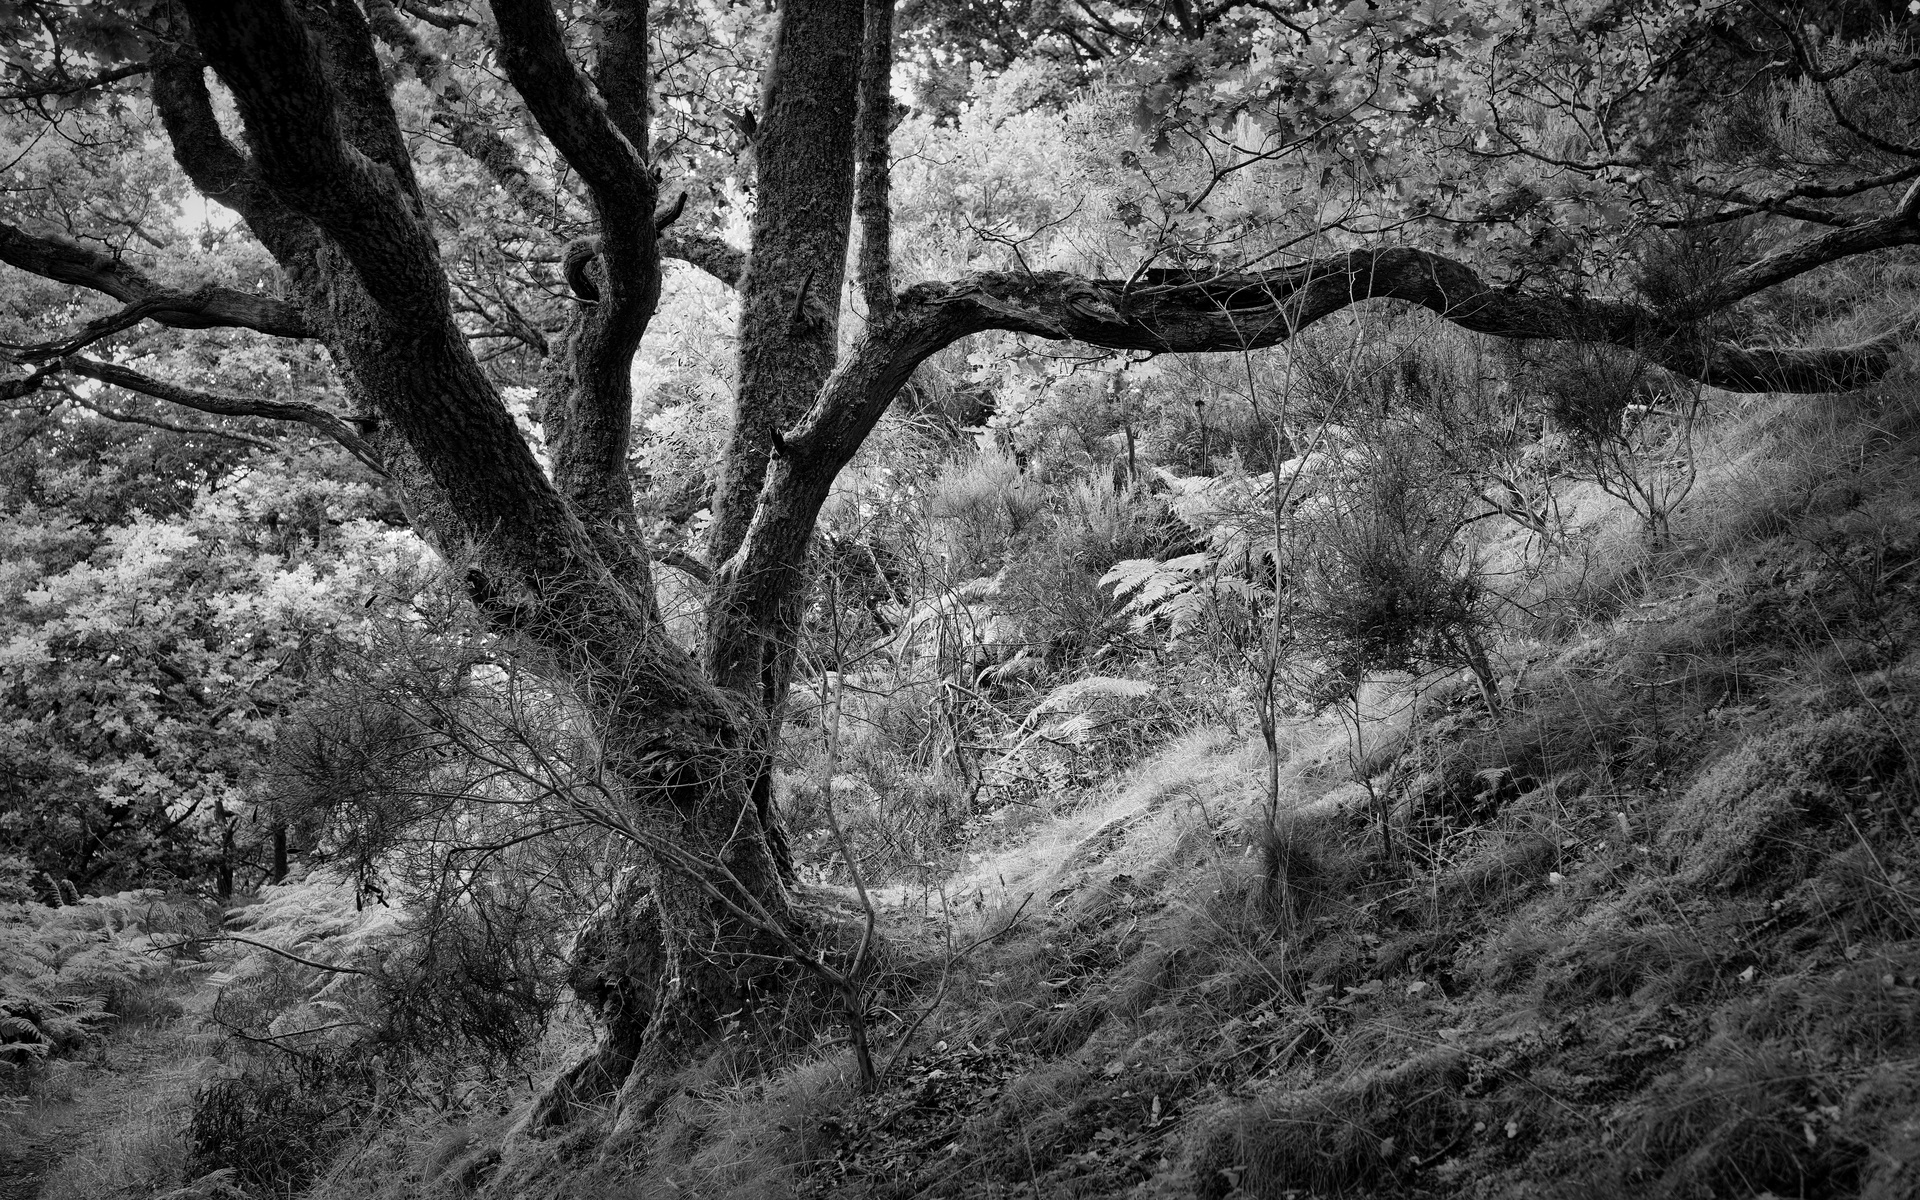 Dunning Glen 7: Characterful Trees 3